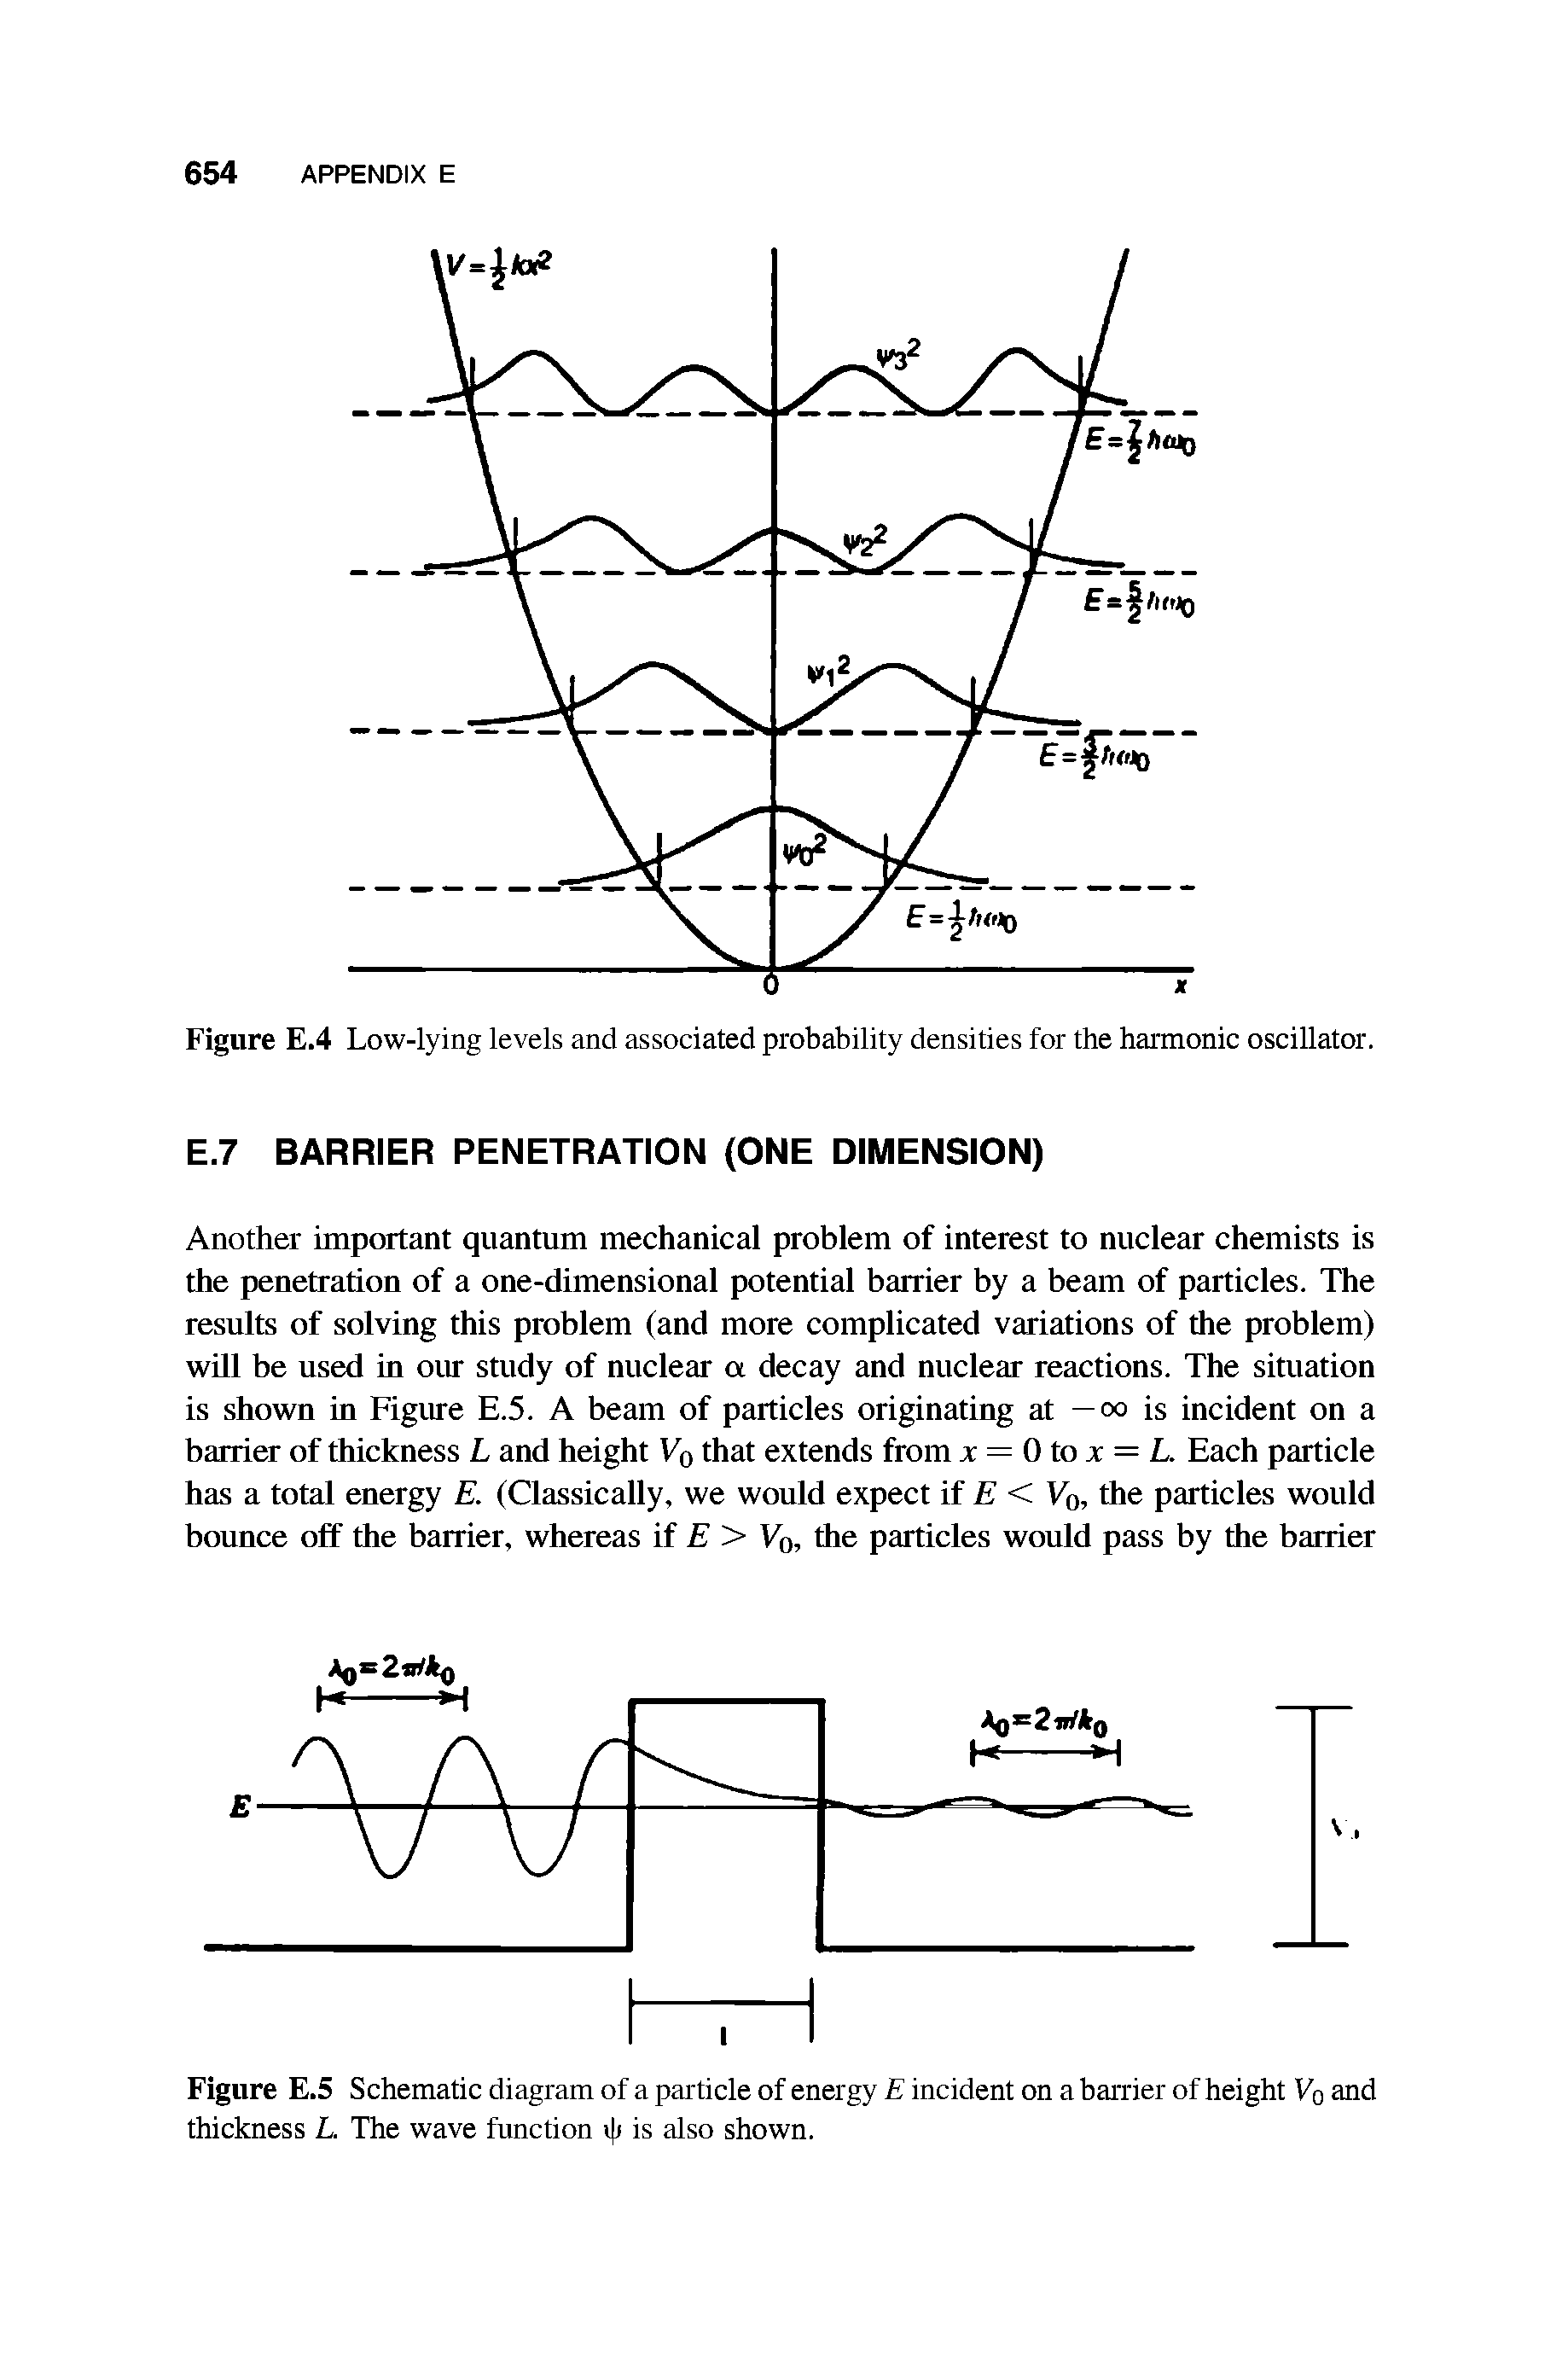 Figure E.4 Low-lying levels and associated probability densities for the harmonic oscillator.